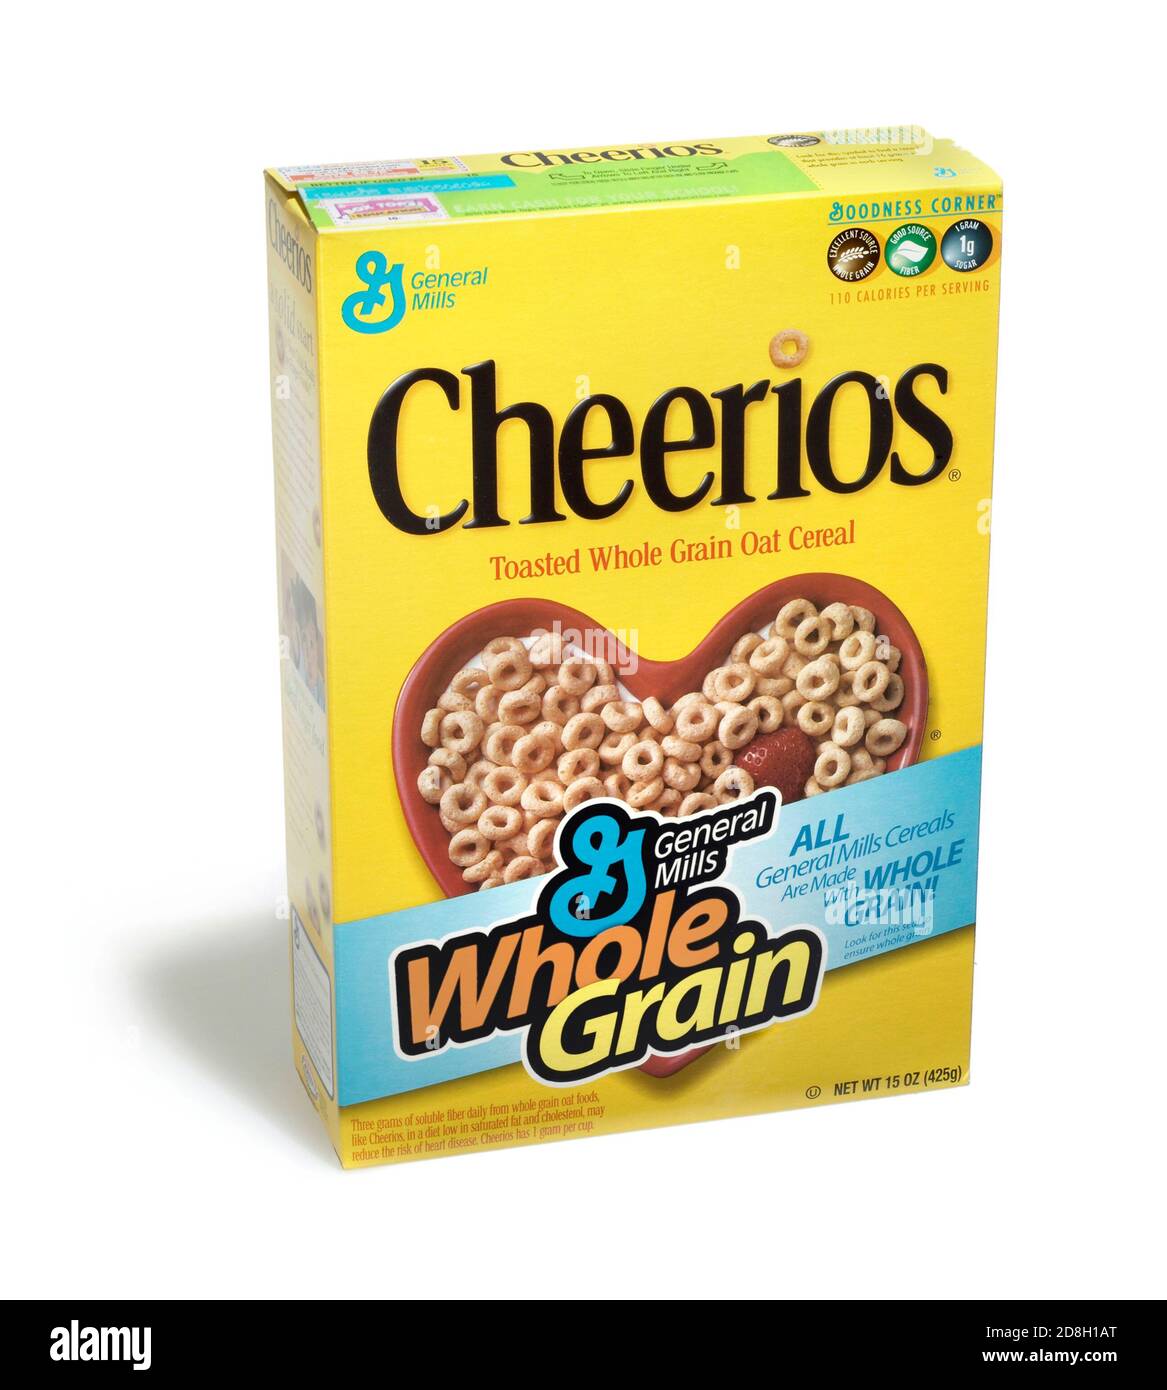 Cheerios Cereal Box High Resolution Stock Photography and Images - Alamy